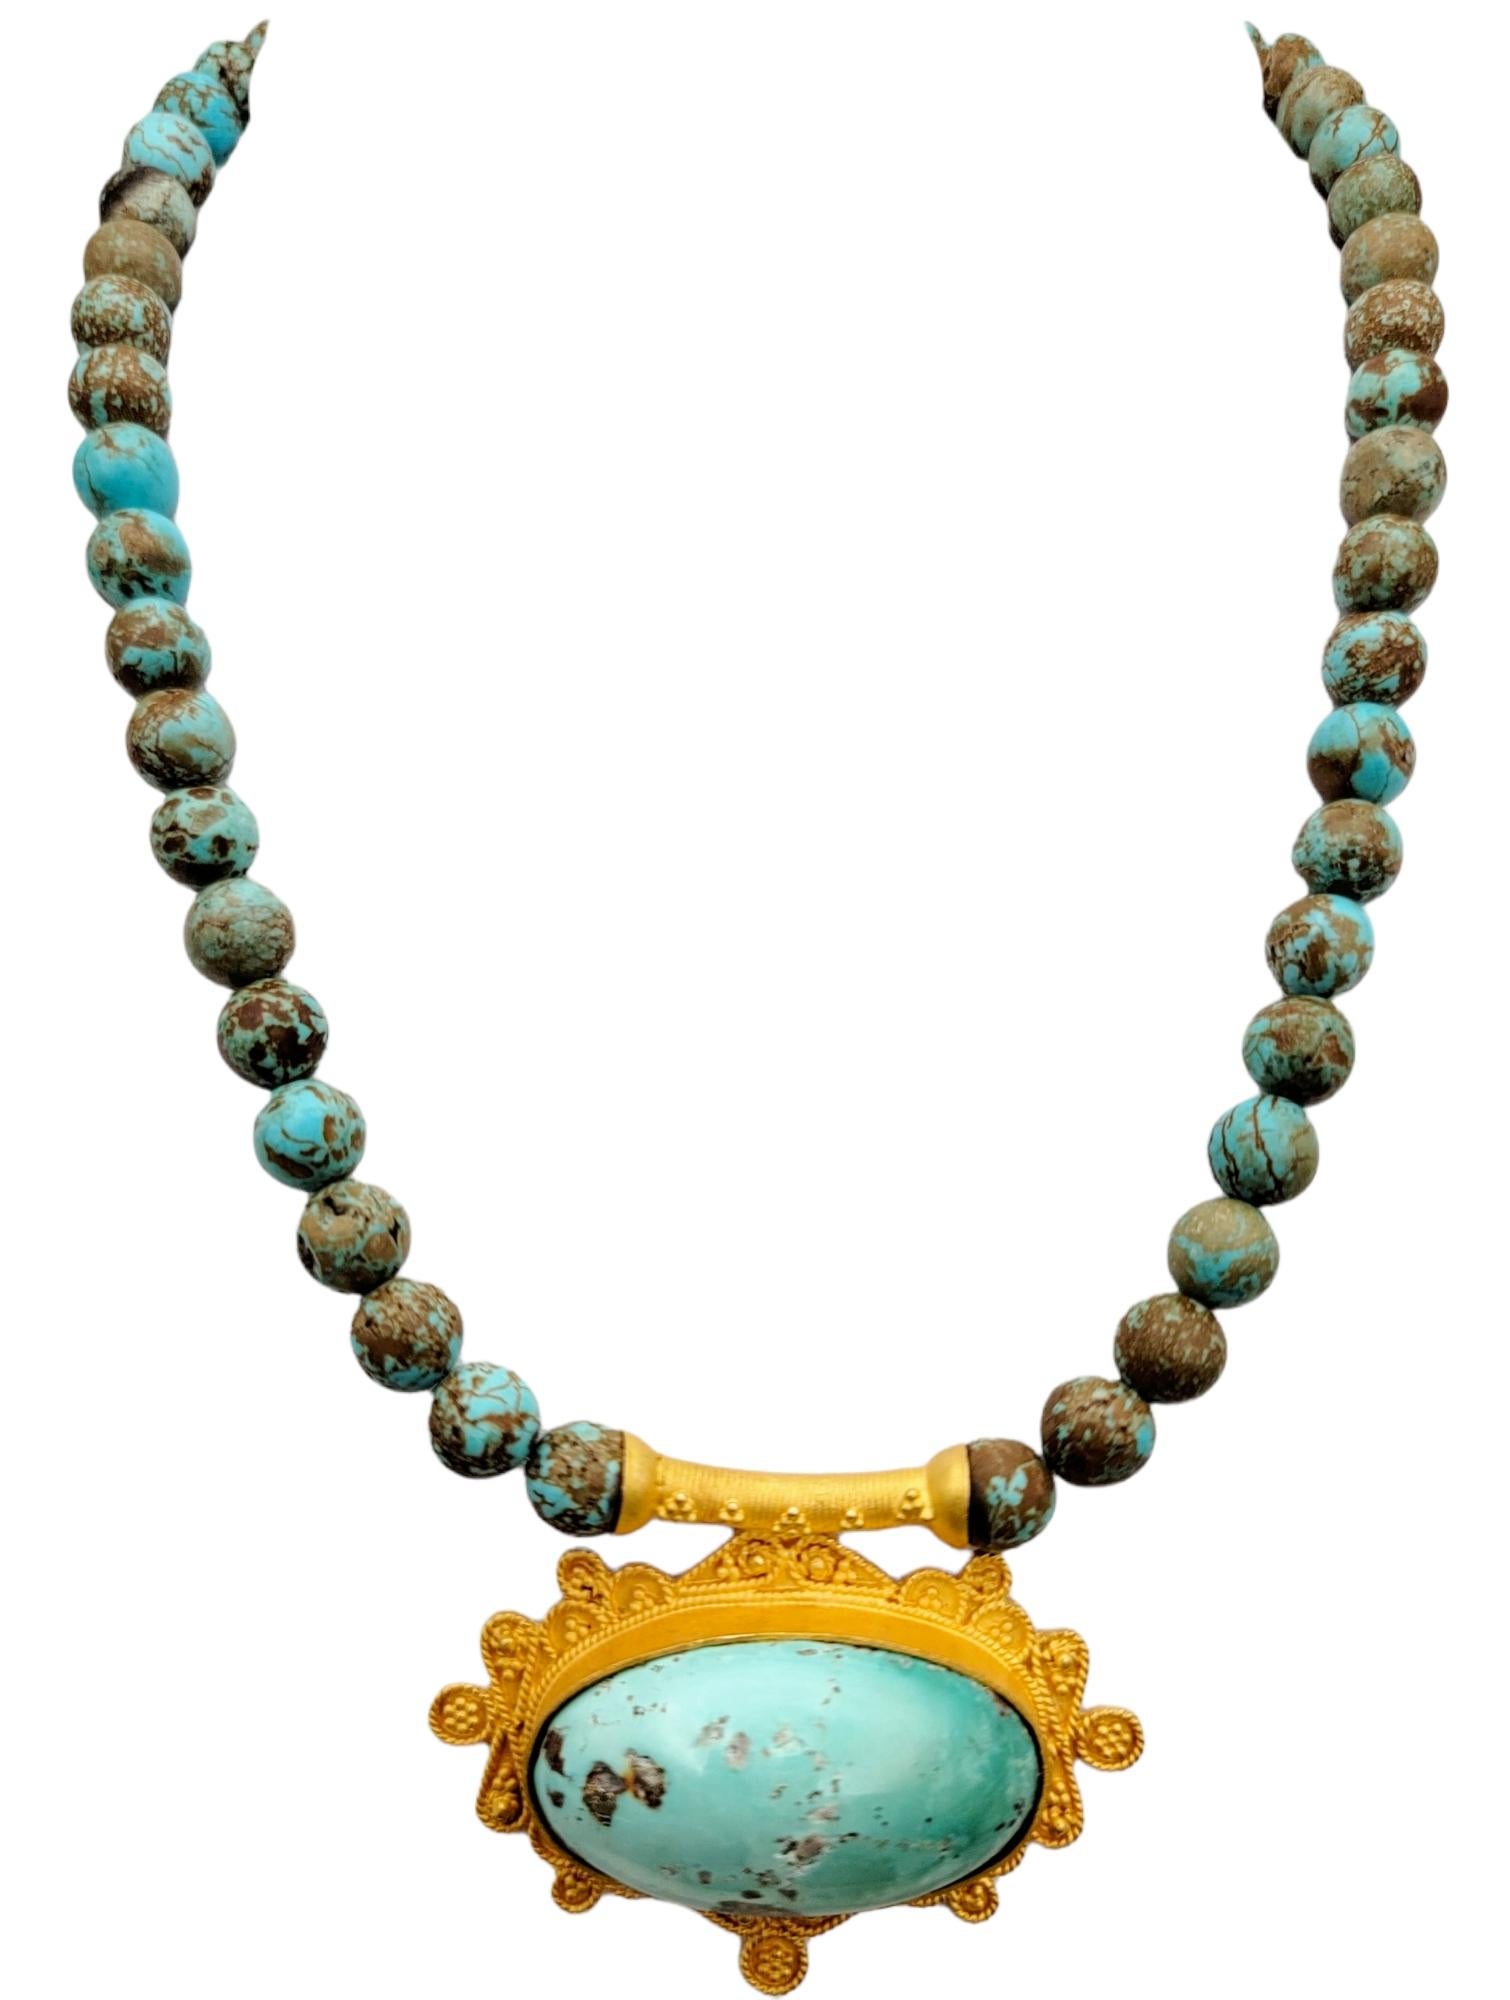 Vibrant turquoise and yellow gold beaded necklace bursting with color. This amazing piece makes an absolutely gorgeous statement on the neck.  Featuring a single strand of round natural turquoise beads, each  varying slightly in color and pattern,